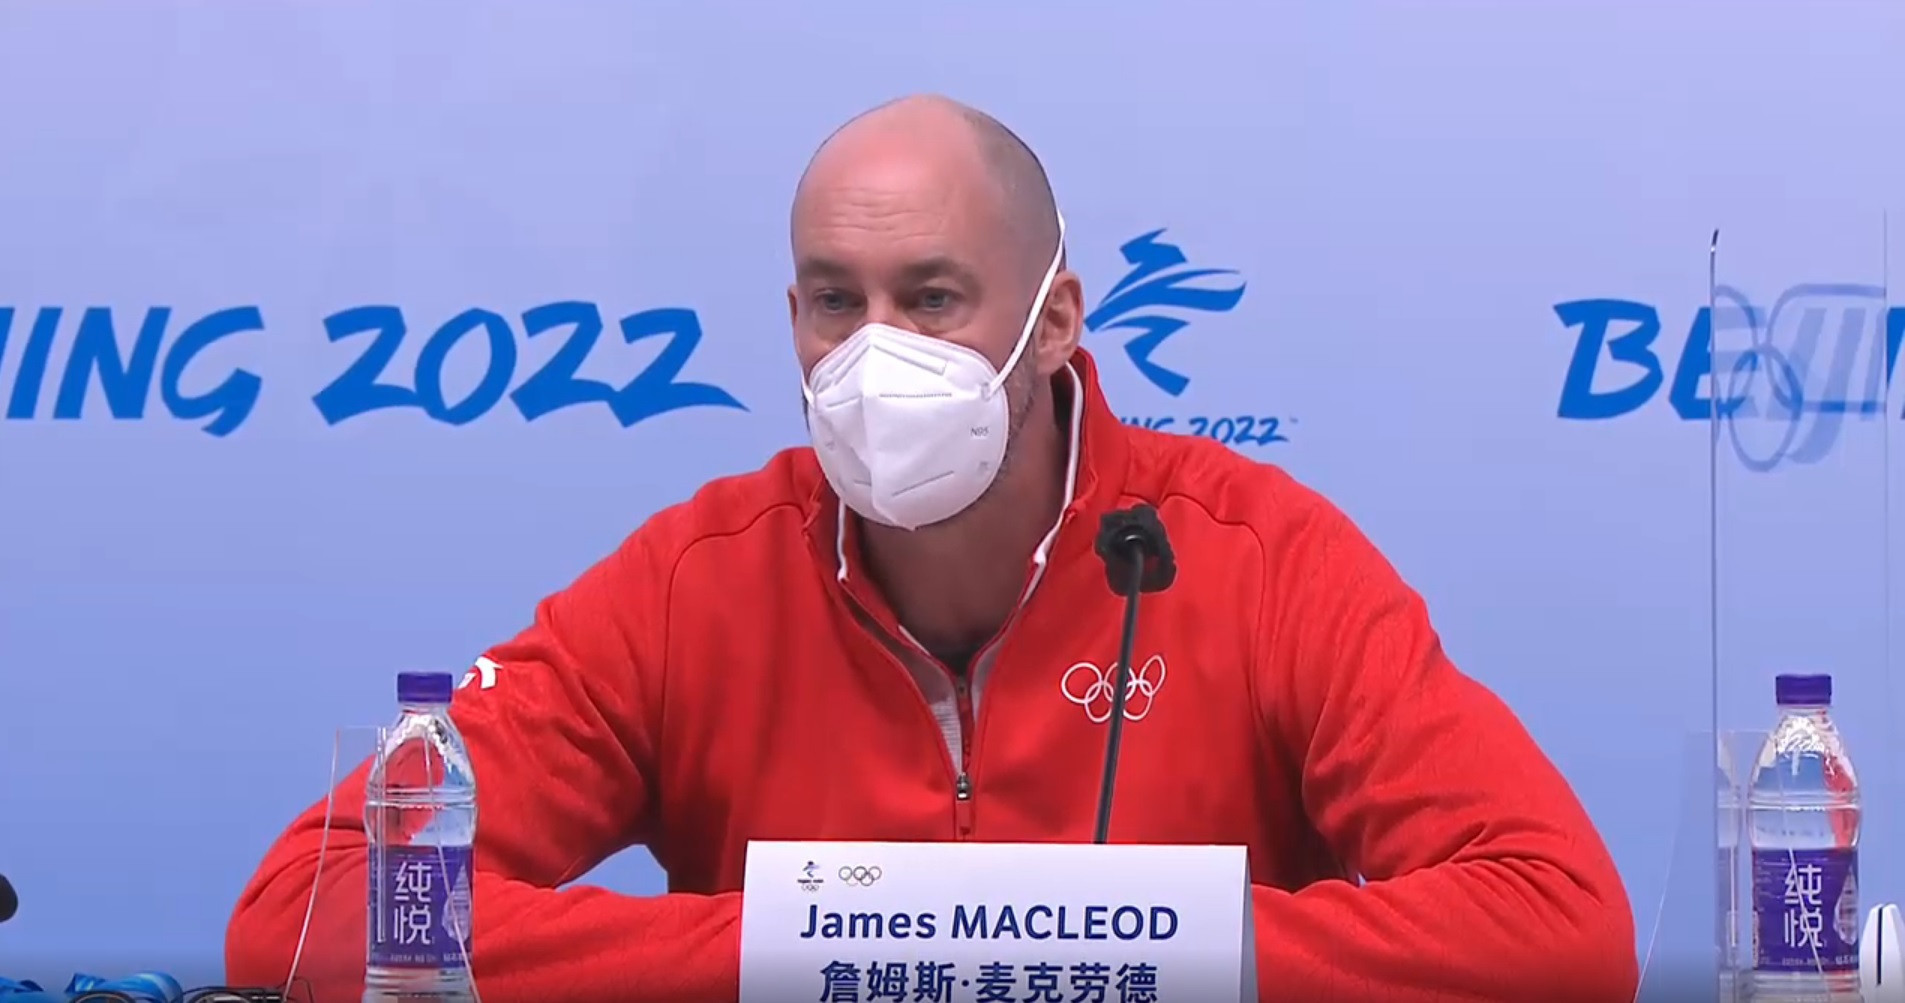 James Macleod, the IOC's director of Olympic Solidarity and NOC relations, faced questions over a lack of African representation at the Games during today's daily press briefing ©ITG